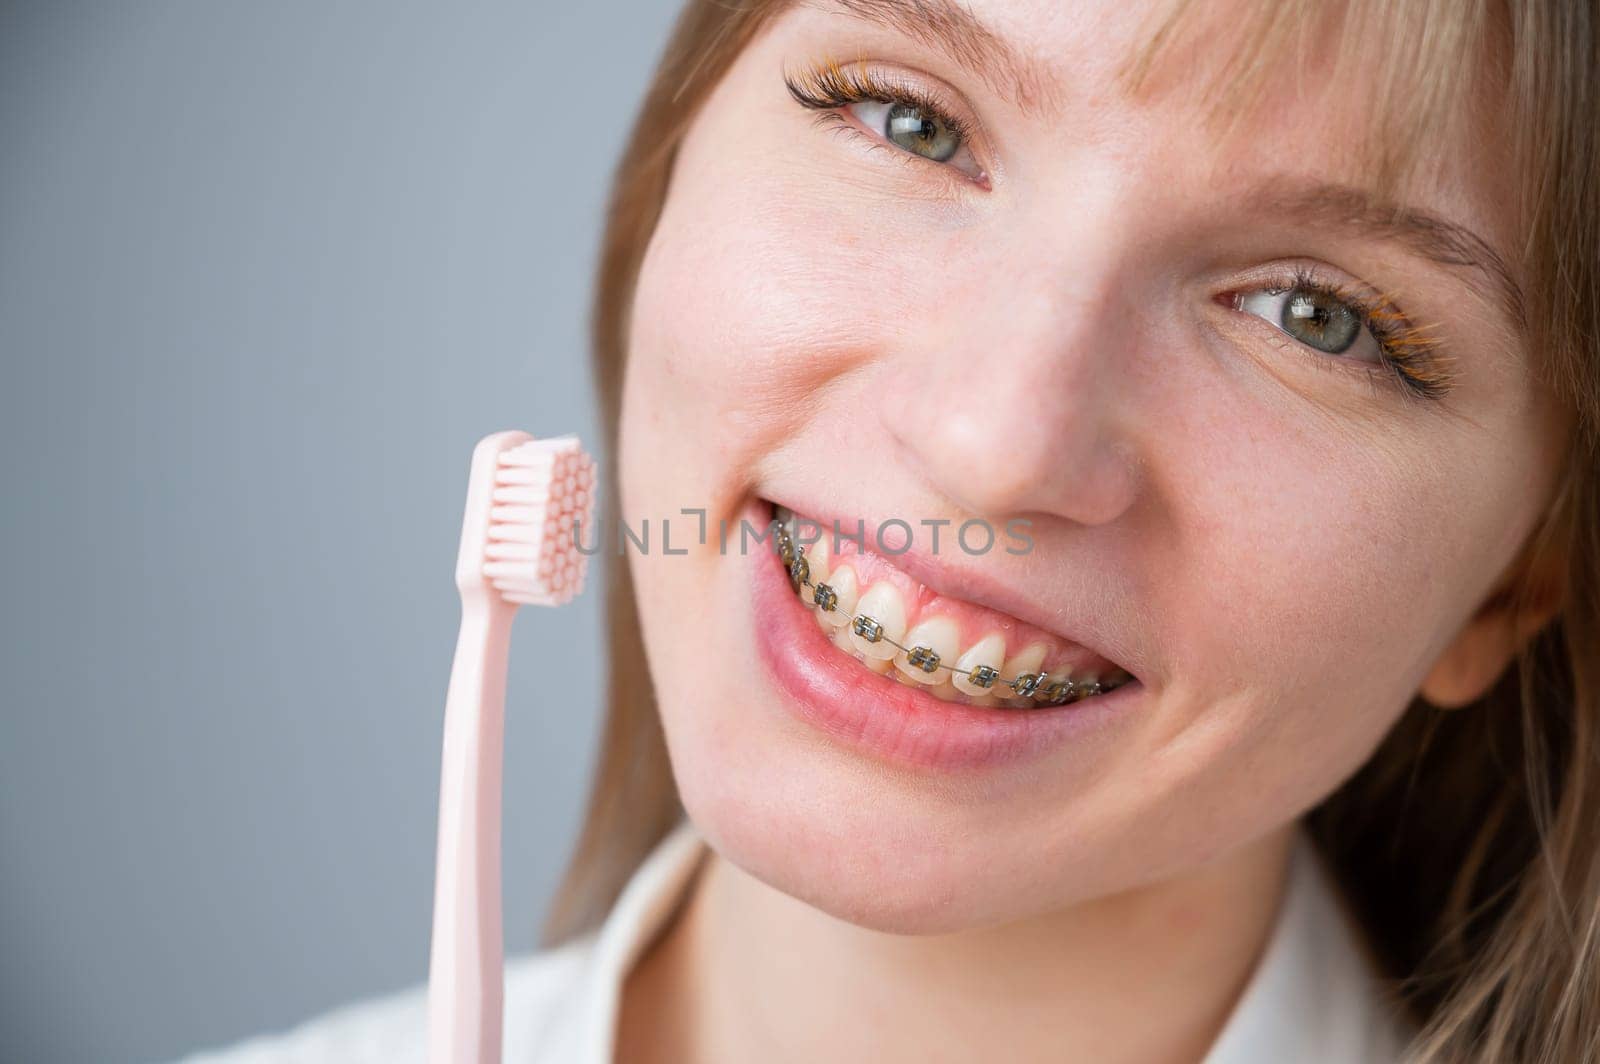 Portrait of a caucasian woman with braces on her teeth holding a toothbrush. by mrwed54